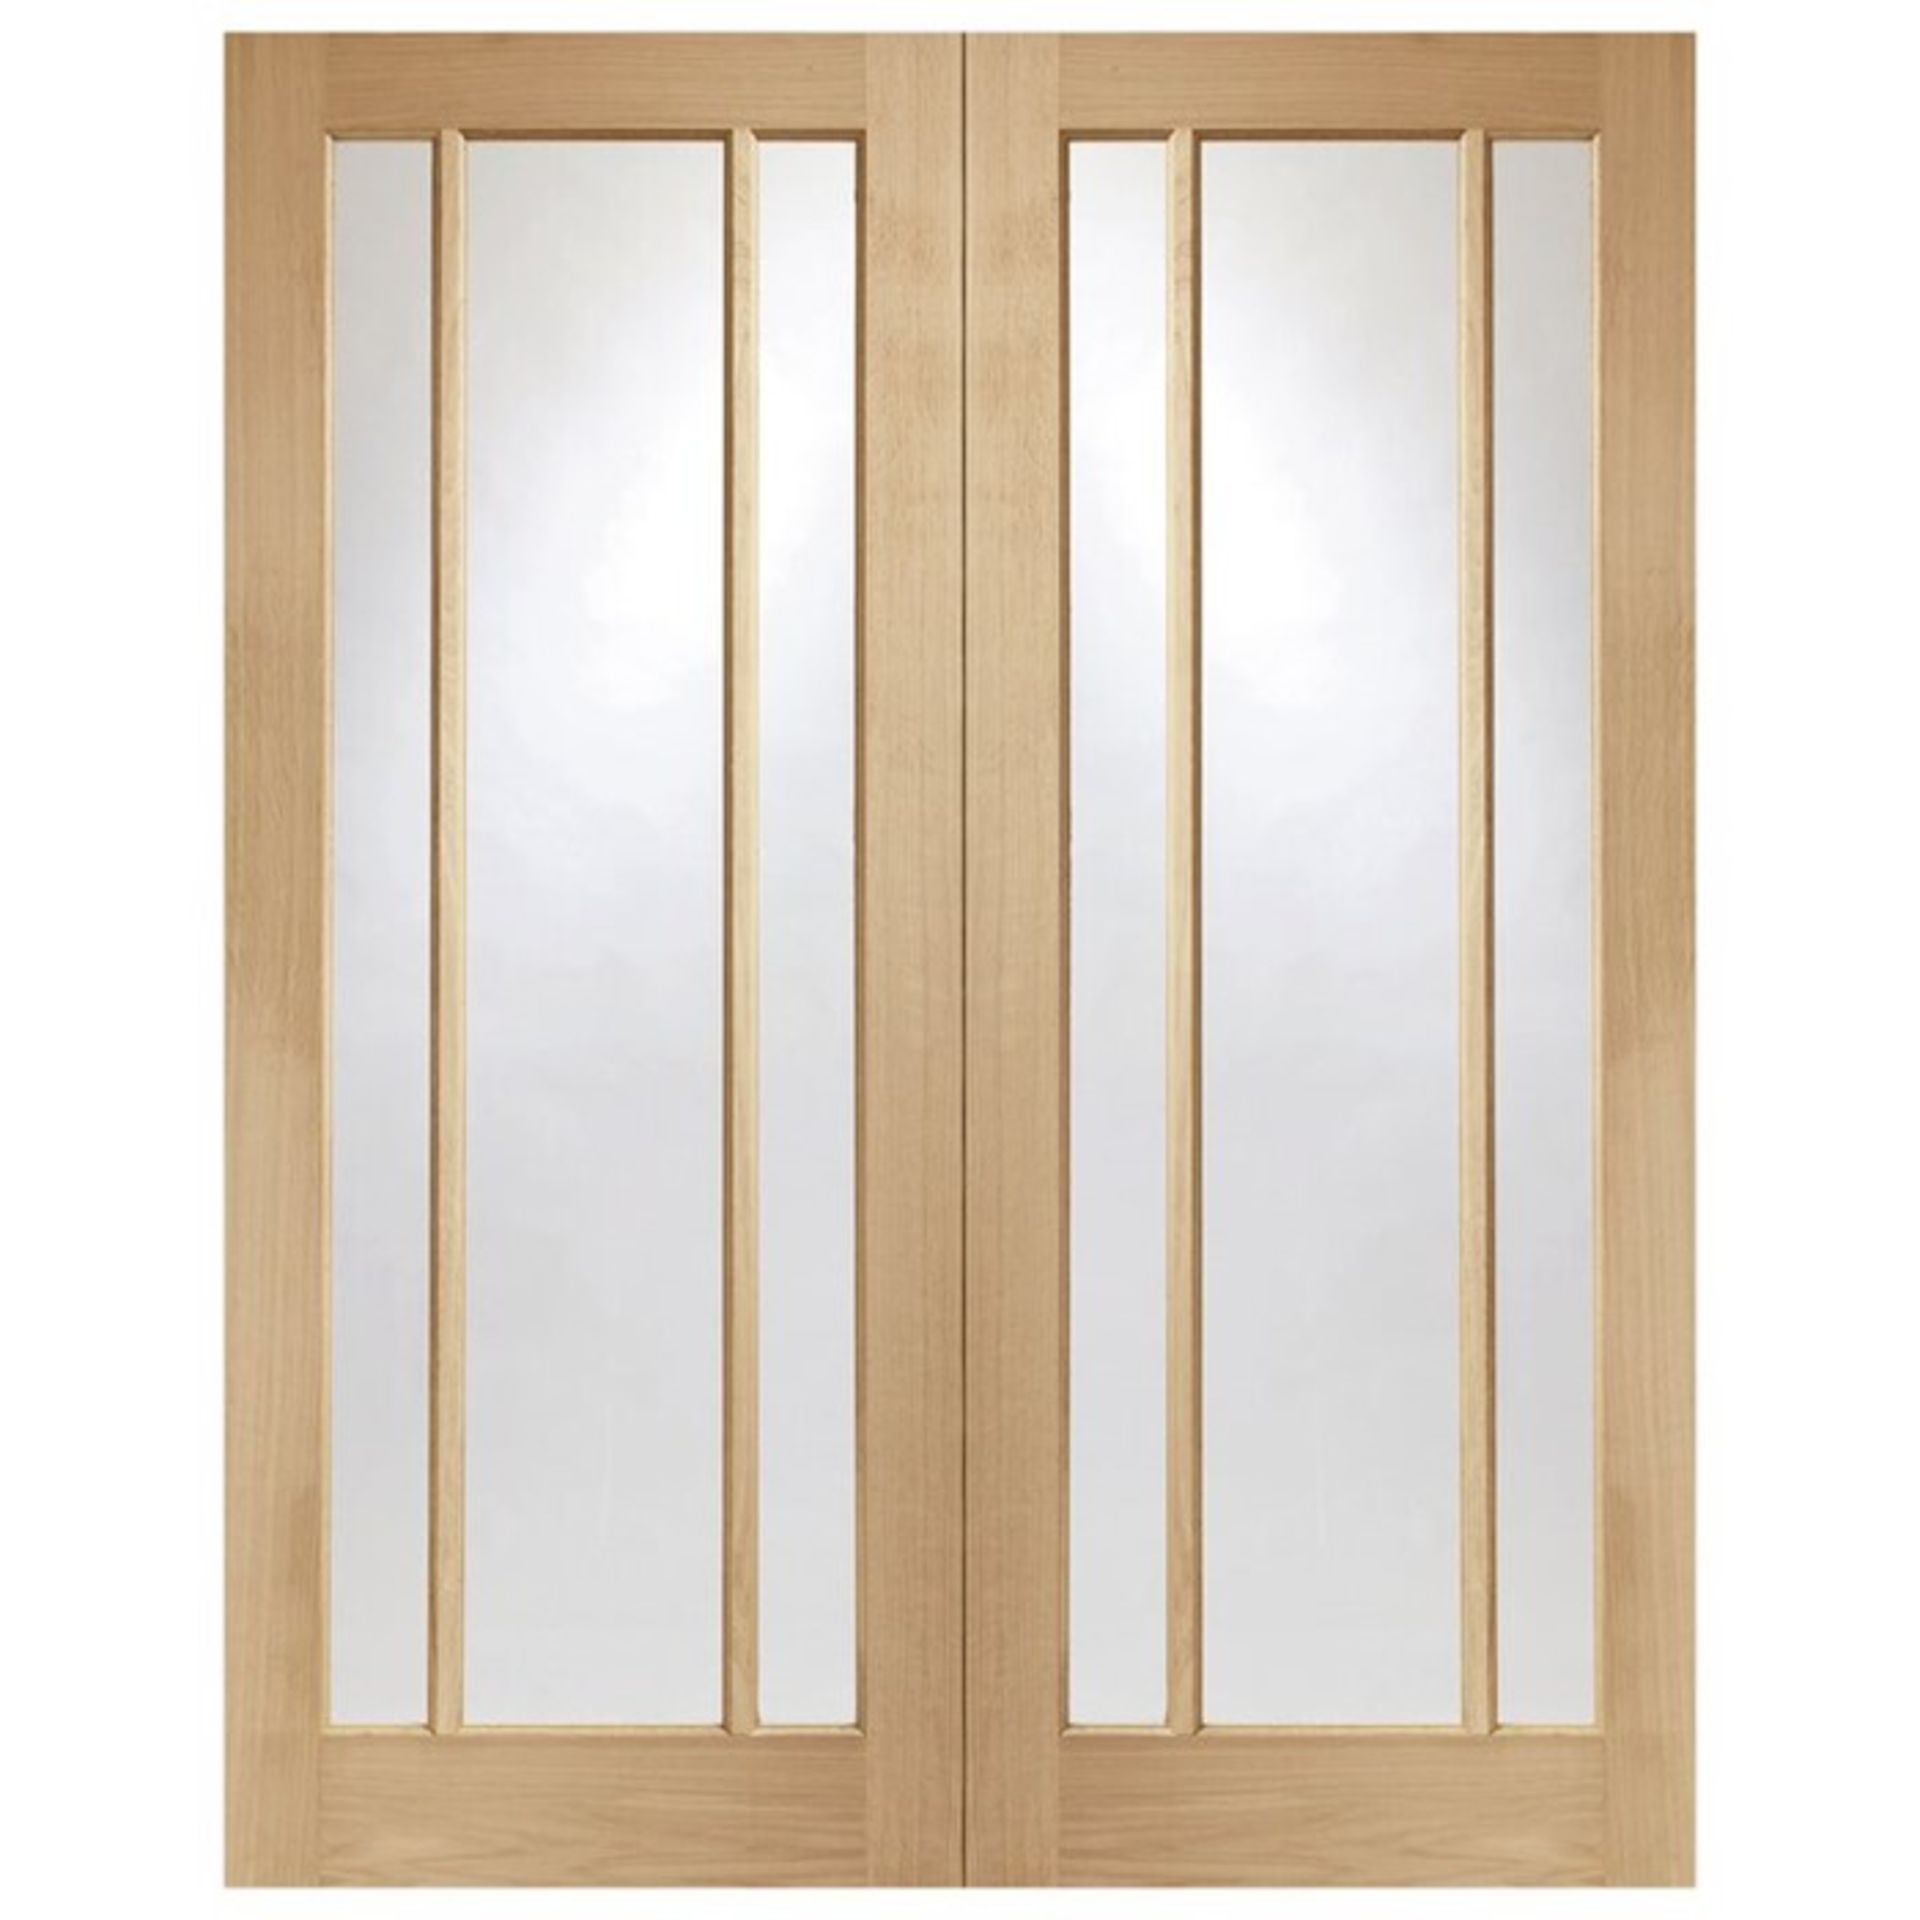 XL Joinery,Worcester Door Pairs Unfinished RRP -£303.99(20592/16 -SDJD1985) (78  x 23")